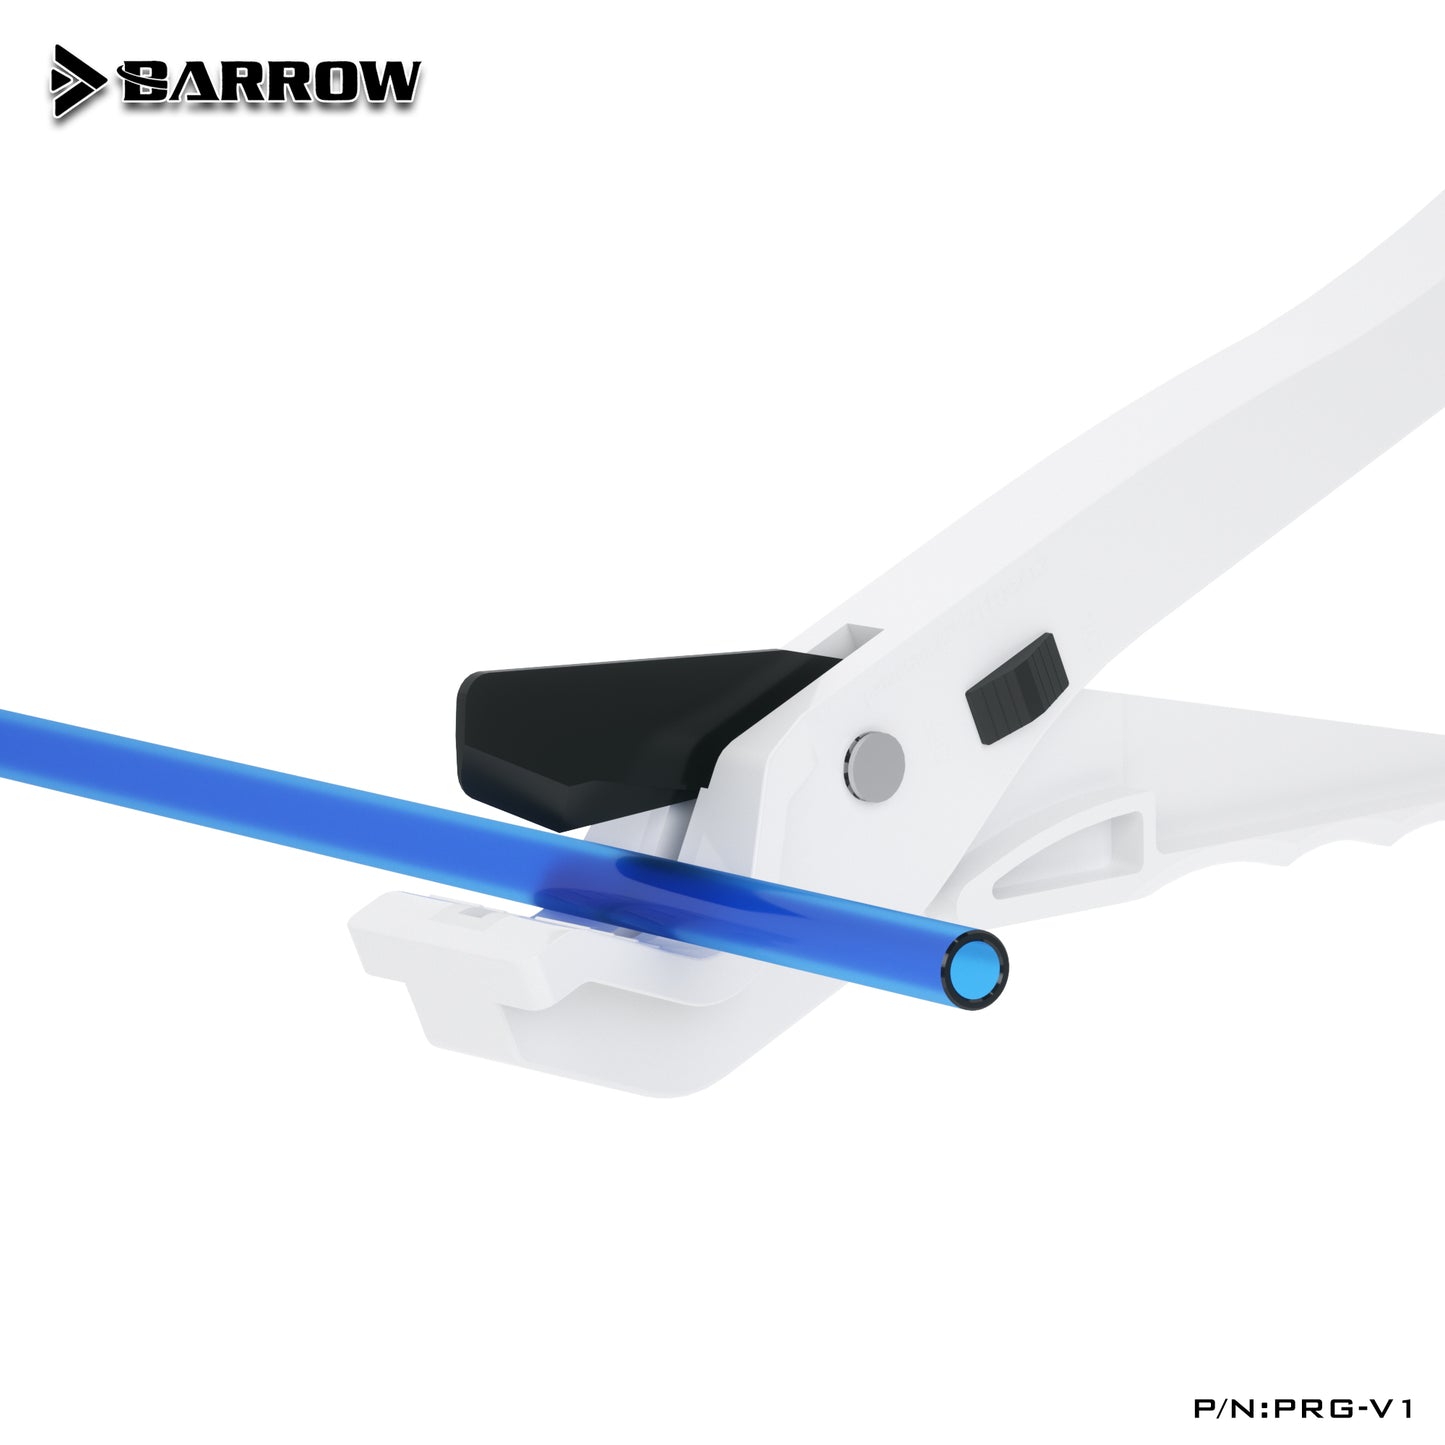 Barrow Tube Fast Cutter, For PETG Hard Tubes / PVC Soft Tubes, Fast Cutting, ABS Tube Tool With Protection Lock, Easy To Operate, PRG-V1